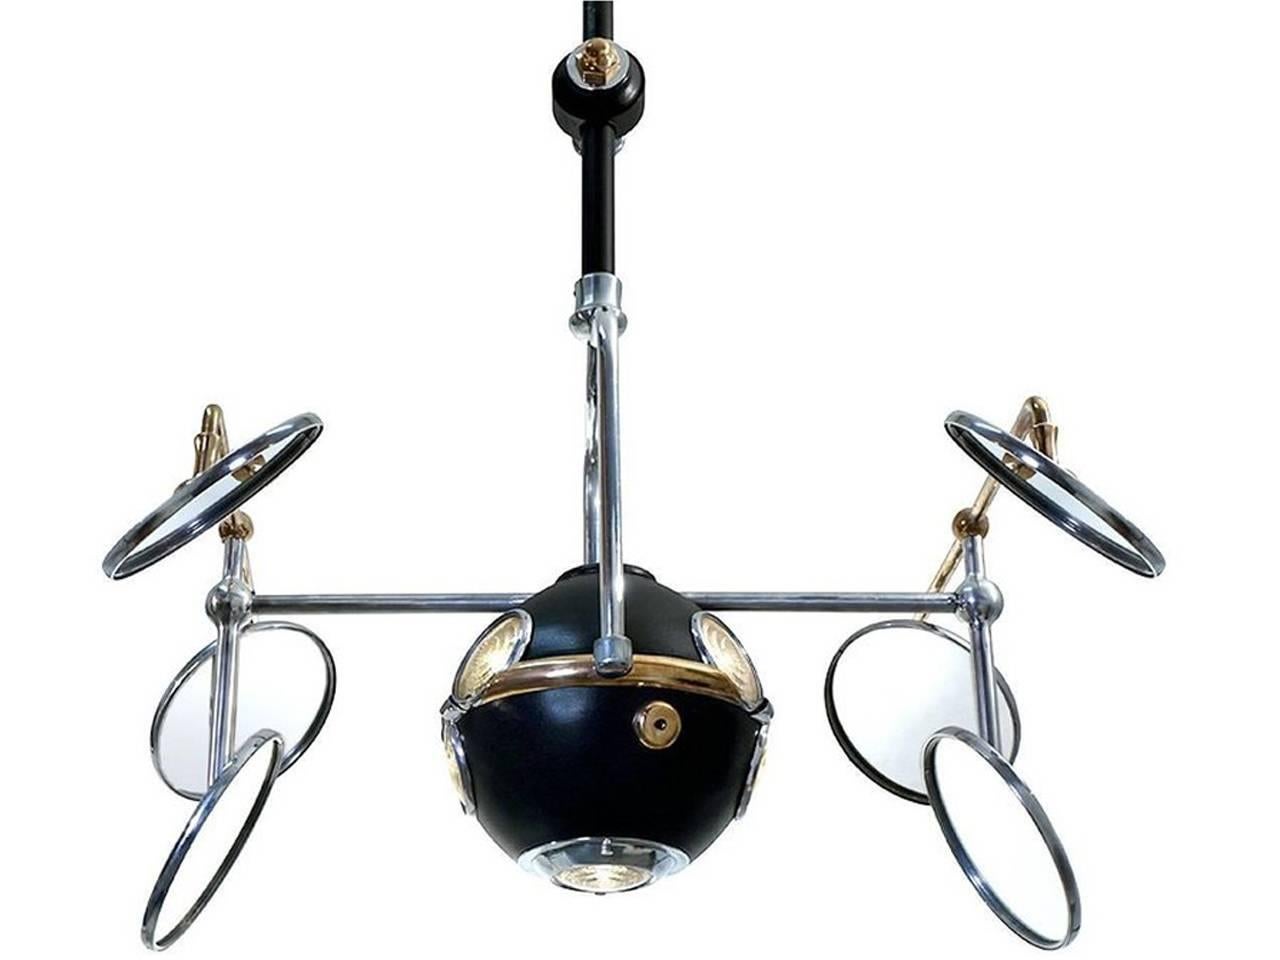 Some consider this lamp the “Holy Grail” of Industrial lighting and typical of the rare odd objects and lamps you will find on our pages. You can’t make a more dramatic visual statement than this lamp! The 12 inch aluminium ball head has five lenses